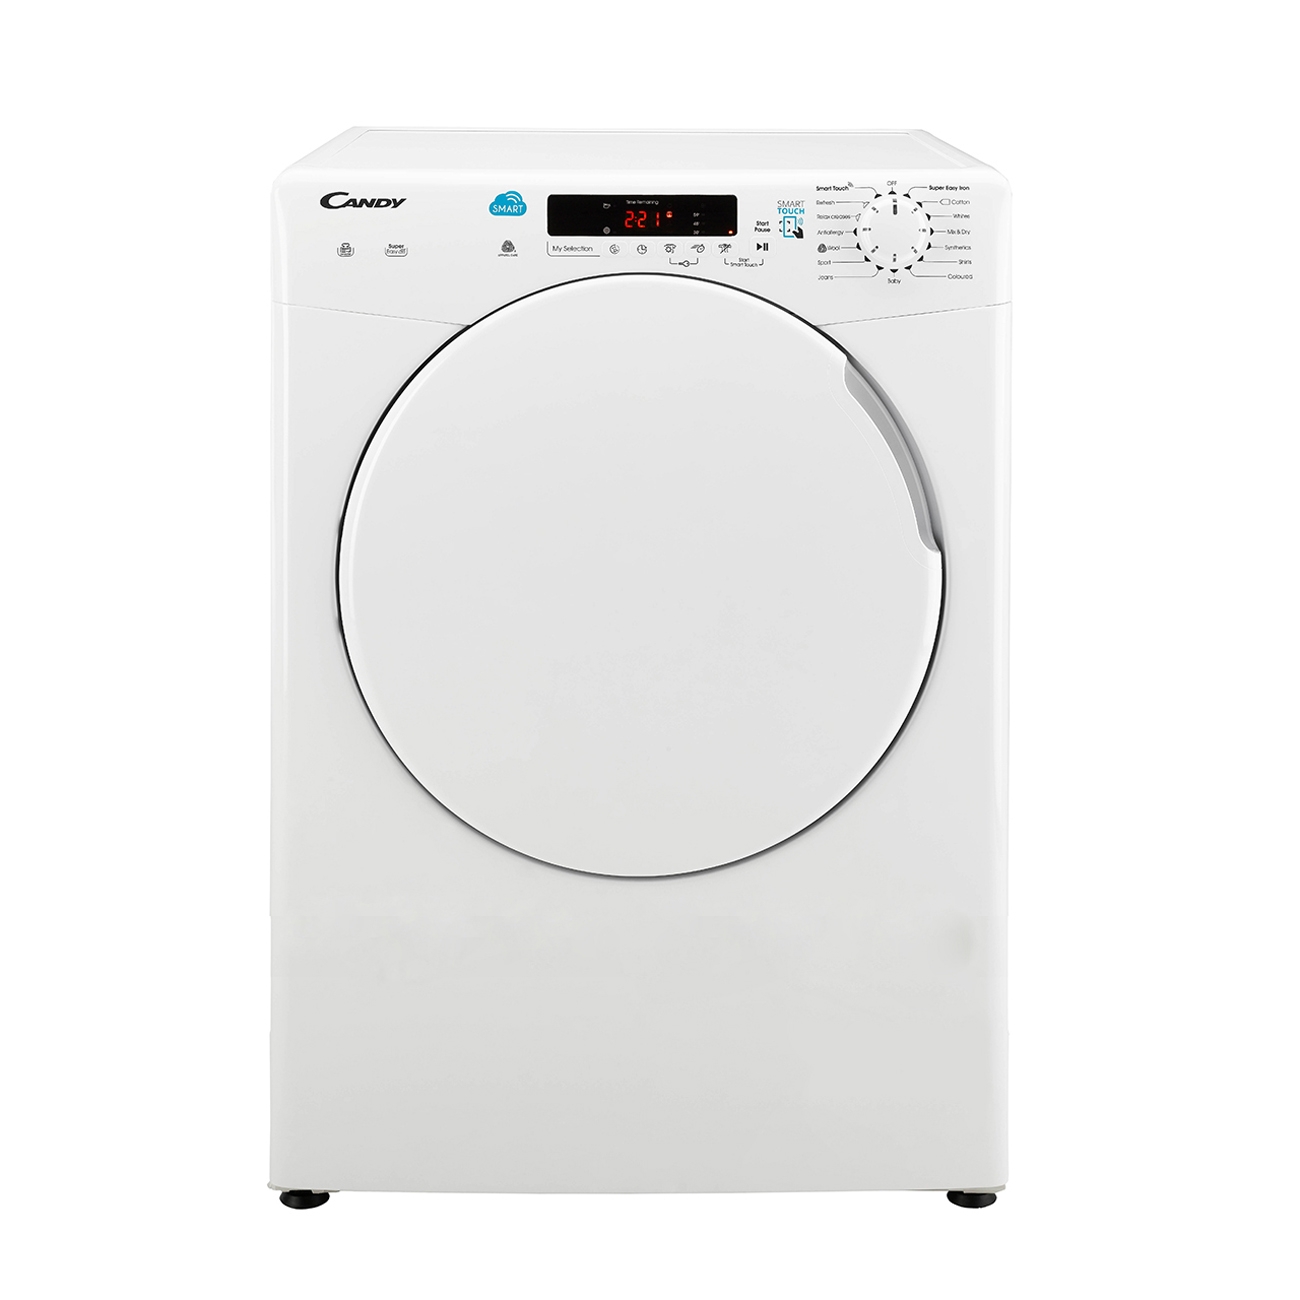 Candy CSV9DF Vented Tumble Dryer White Freestanding 9kg Delay Start